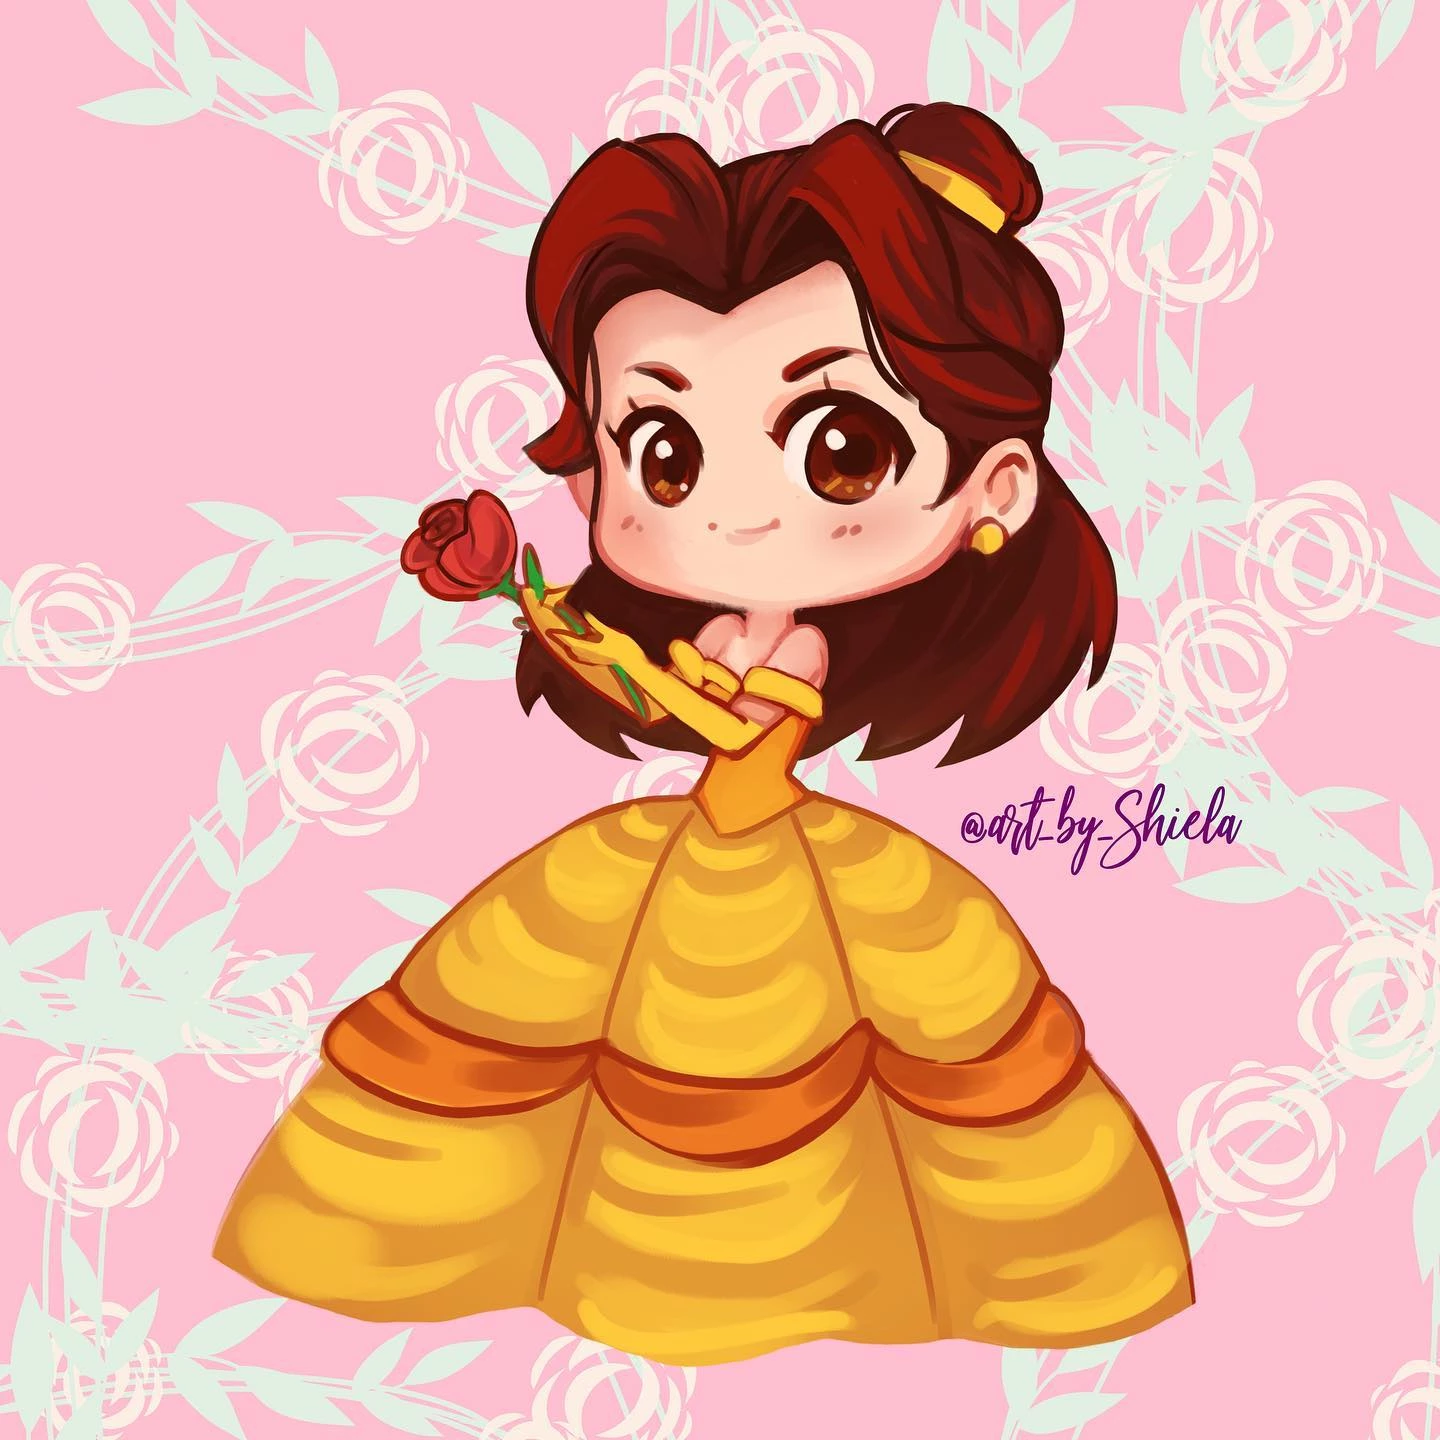 We Have Belle, Donning Her Iconic Yellow Dress To Dance With The Beast